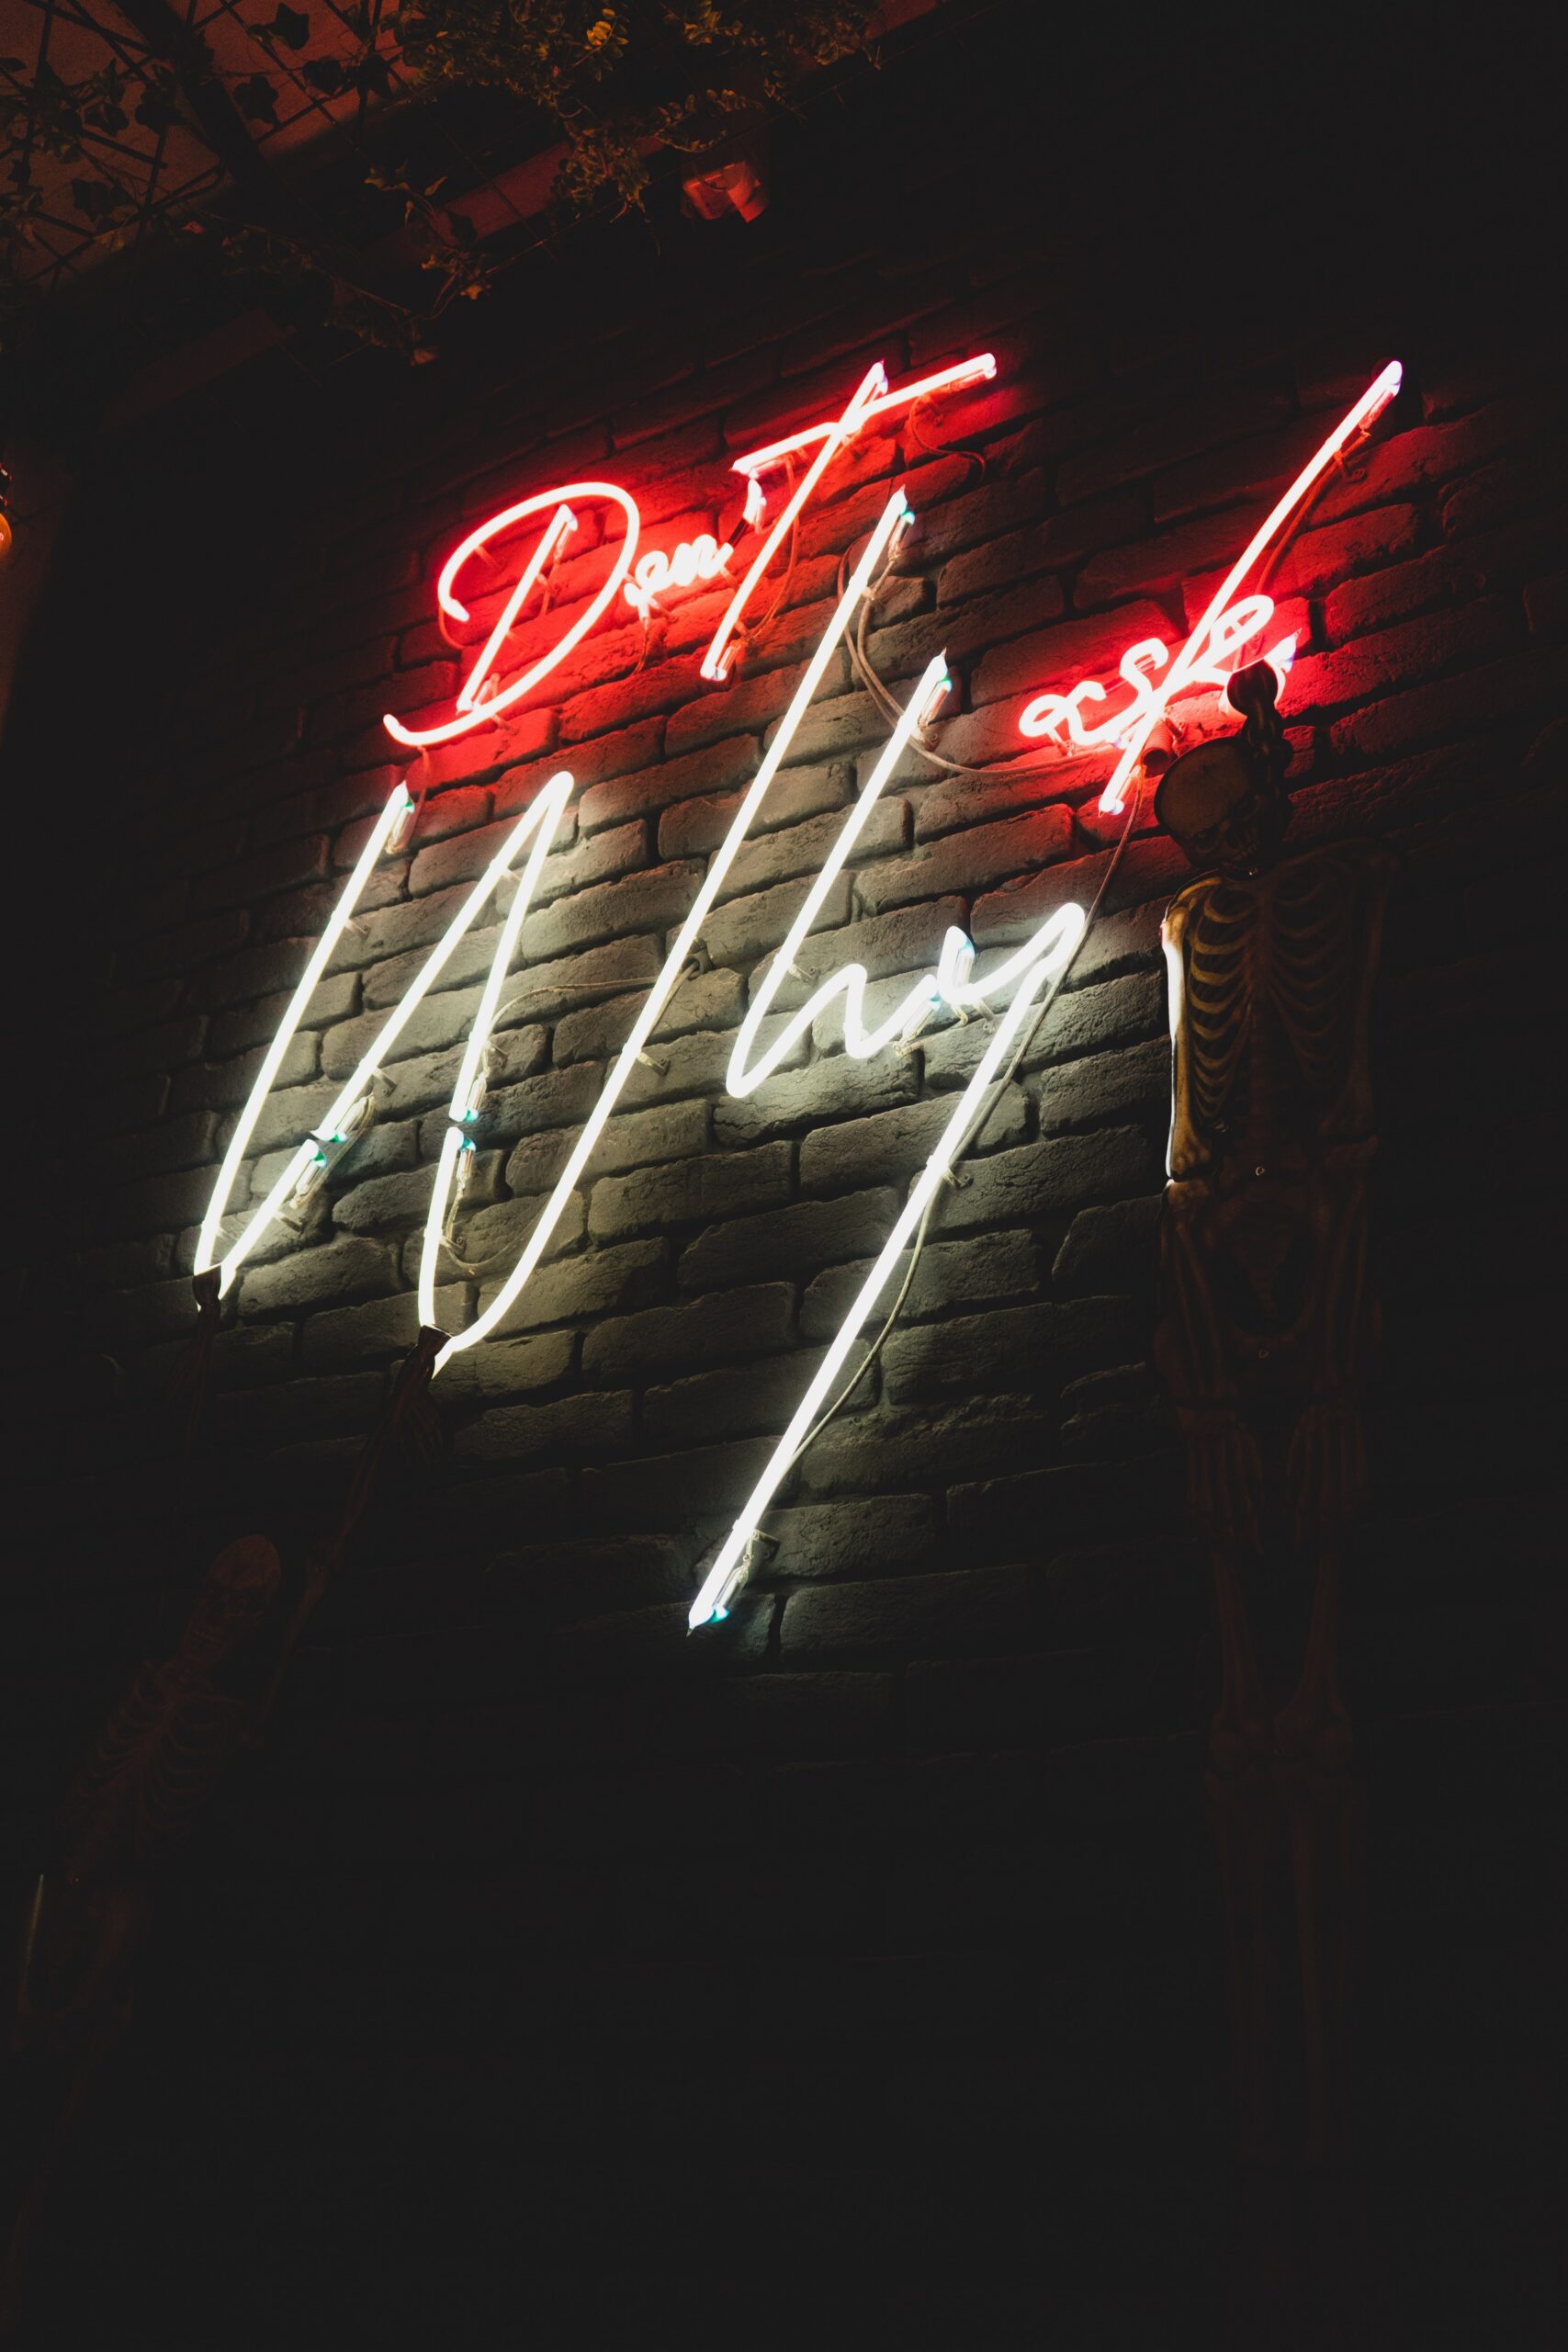 Neon sign that spells "Don't ask Why"